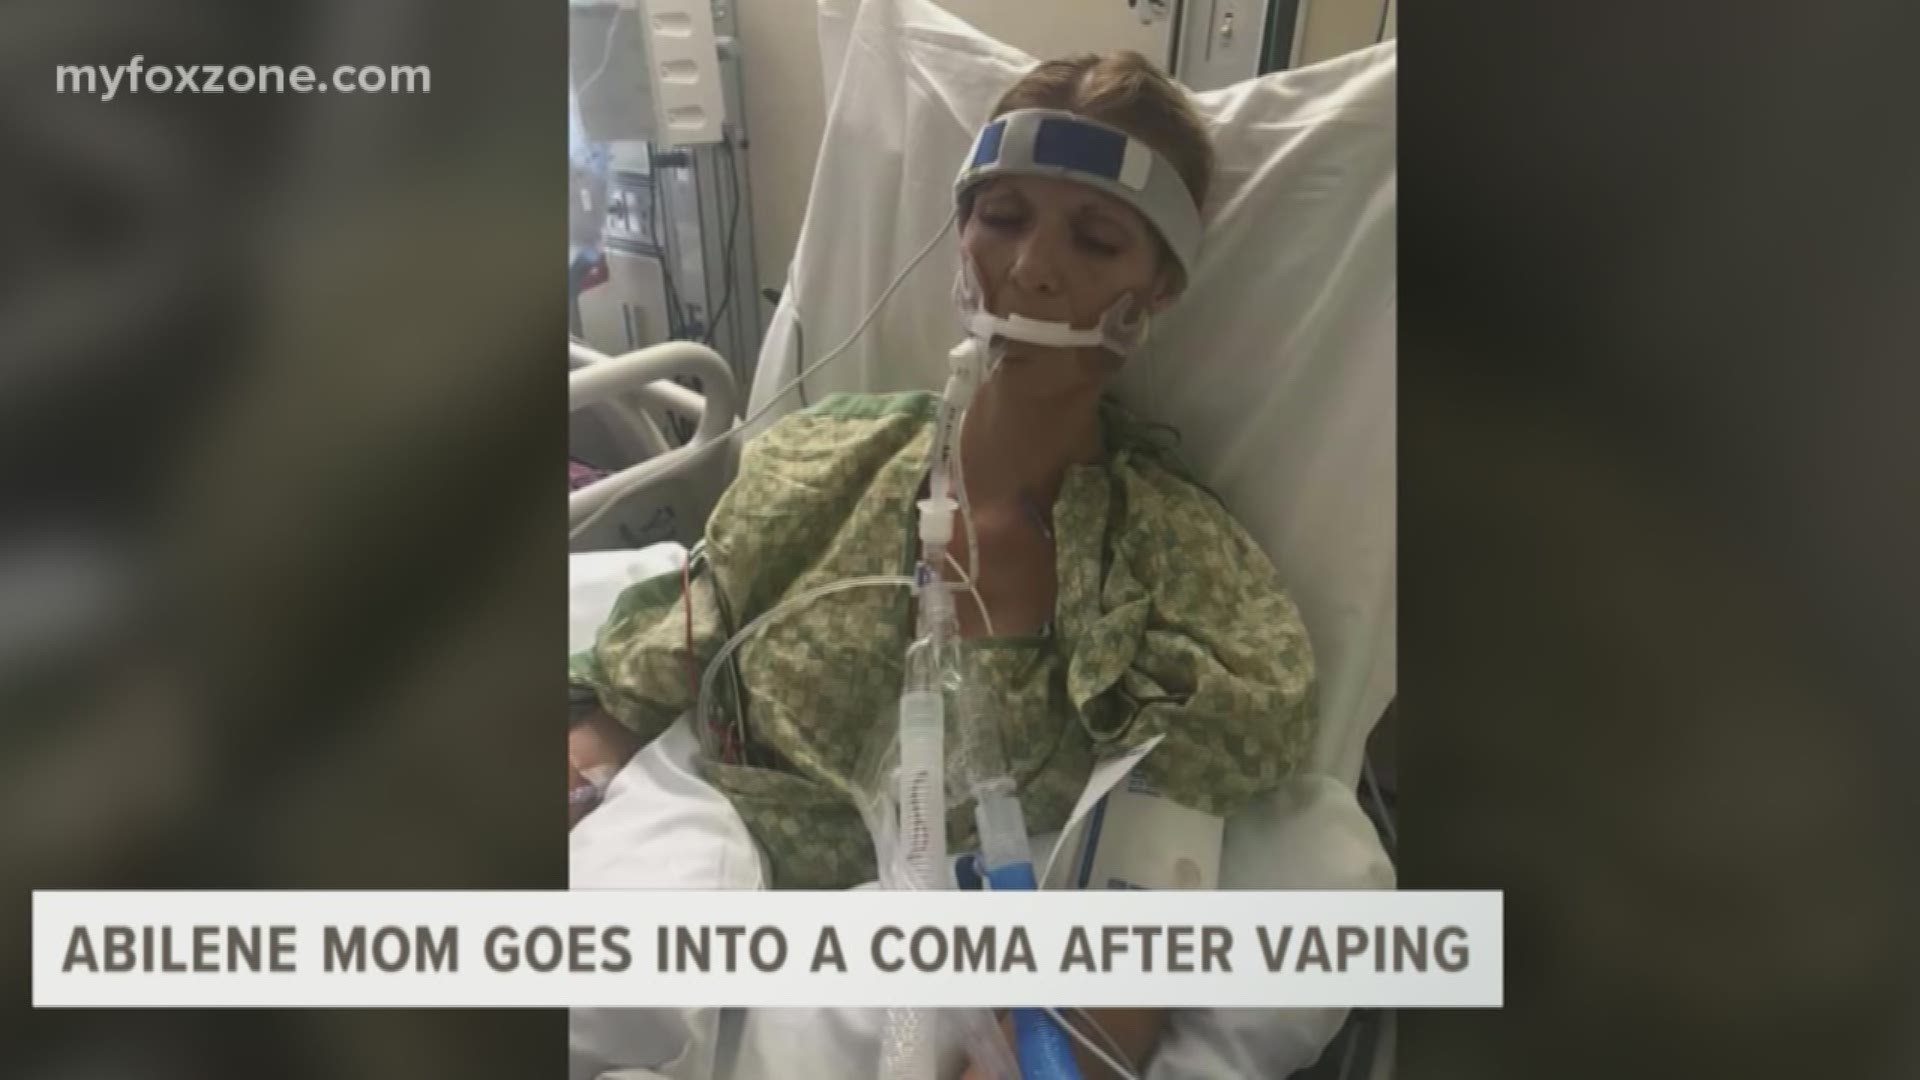 After years of vaping, one west Texas mother shares her story of what vaping did to her.